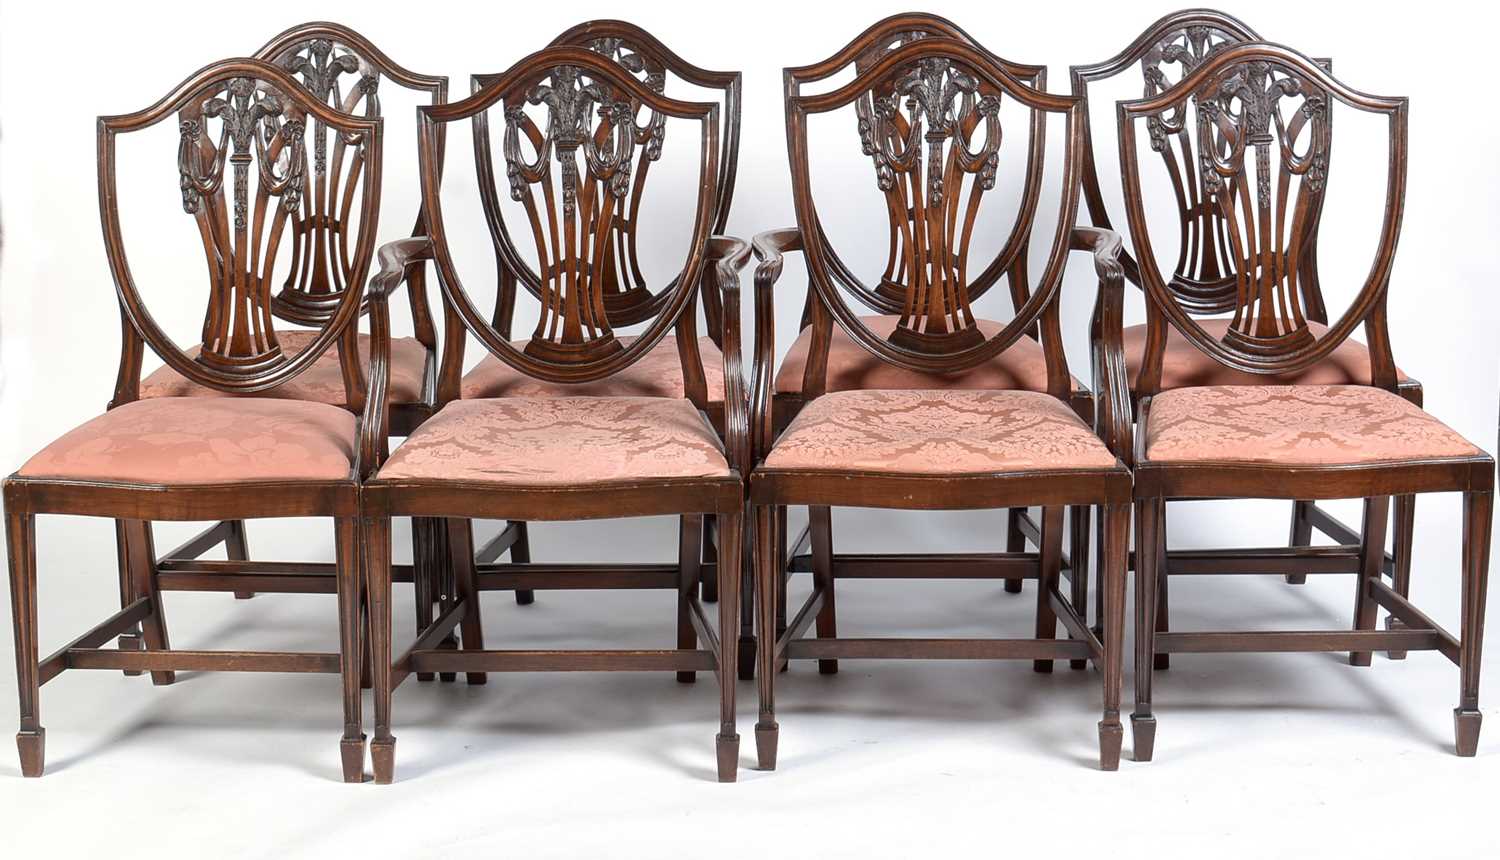 Lot 40 - A set of eight Georgian-style mahogany dining chairs.